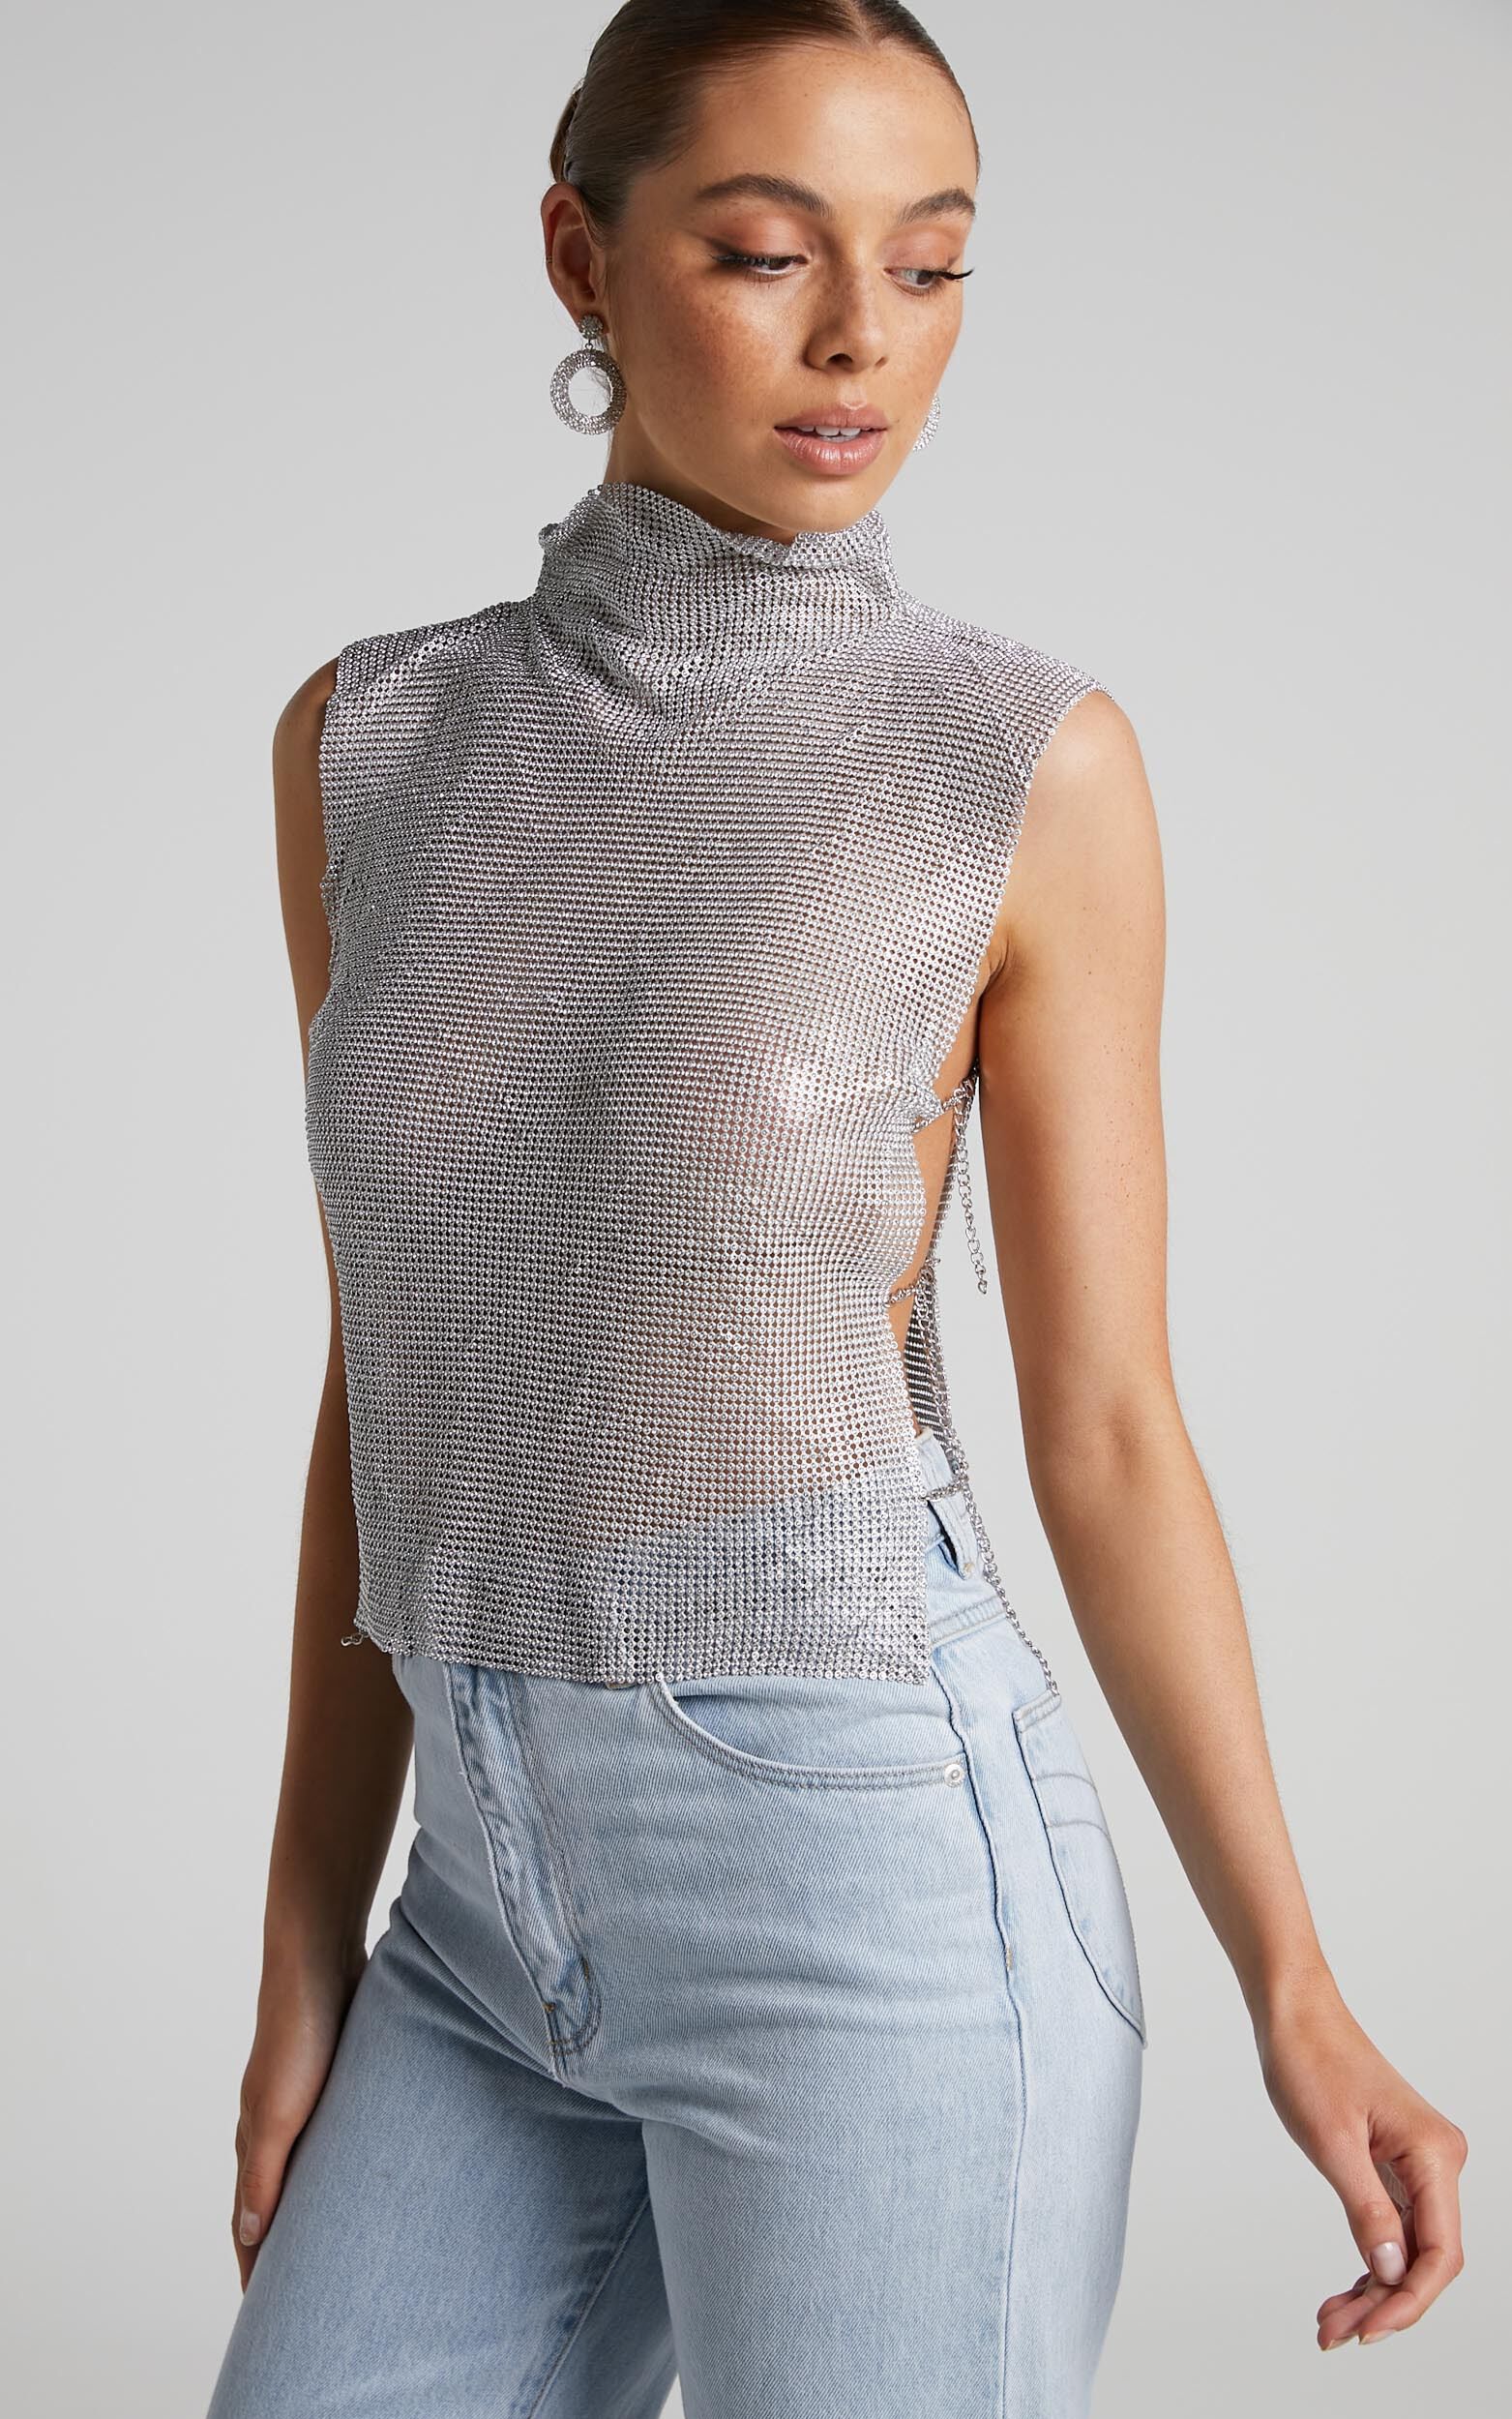 Dalena Top - Sleeveless High Neck Mesh Chainmail Top in Silver - L, SLV2